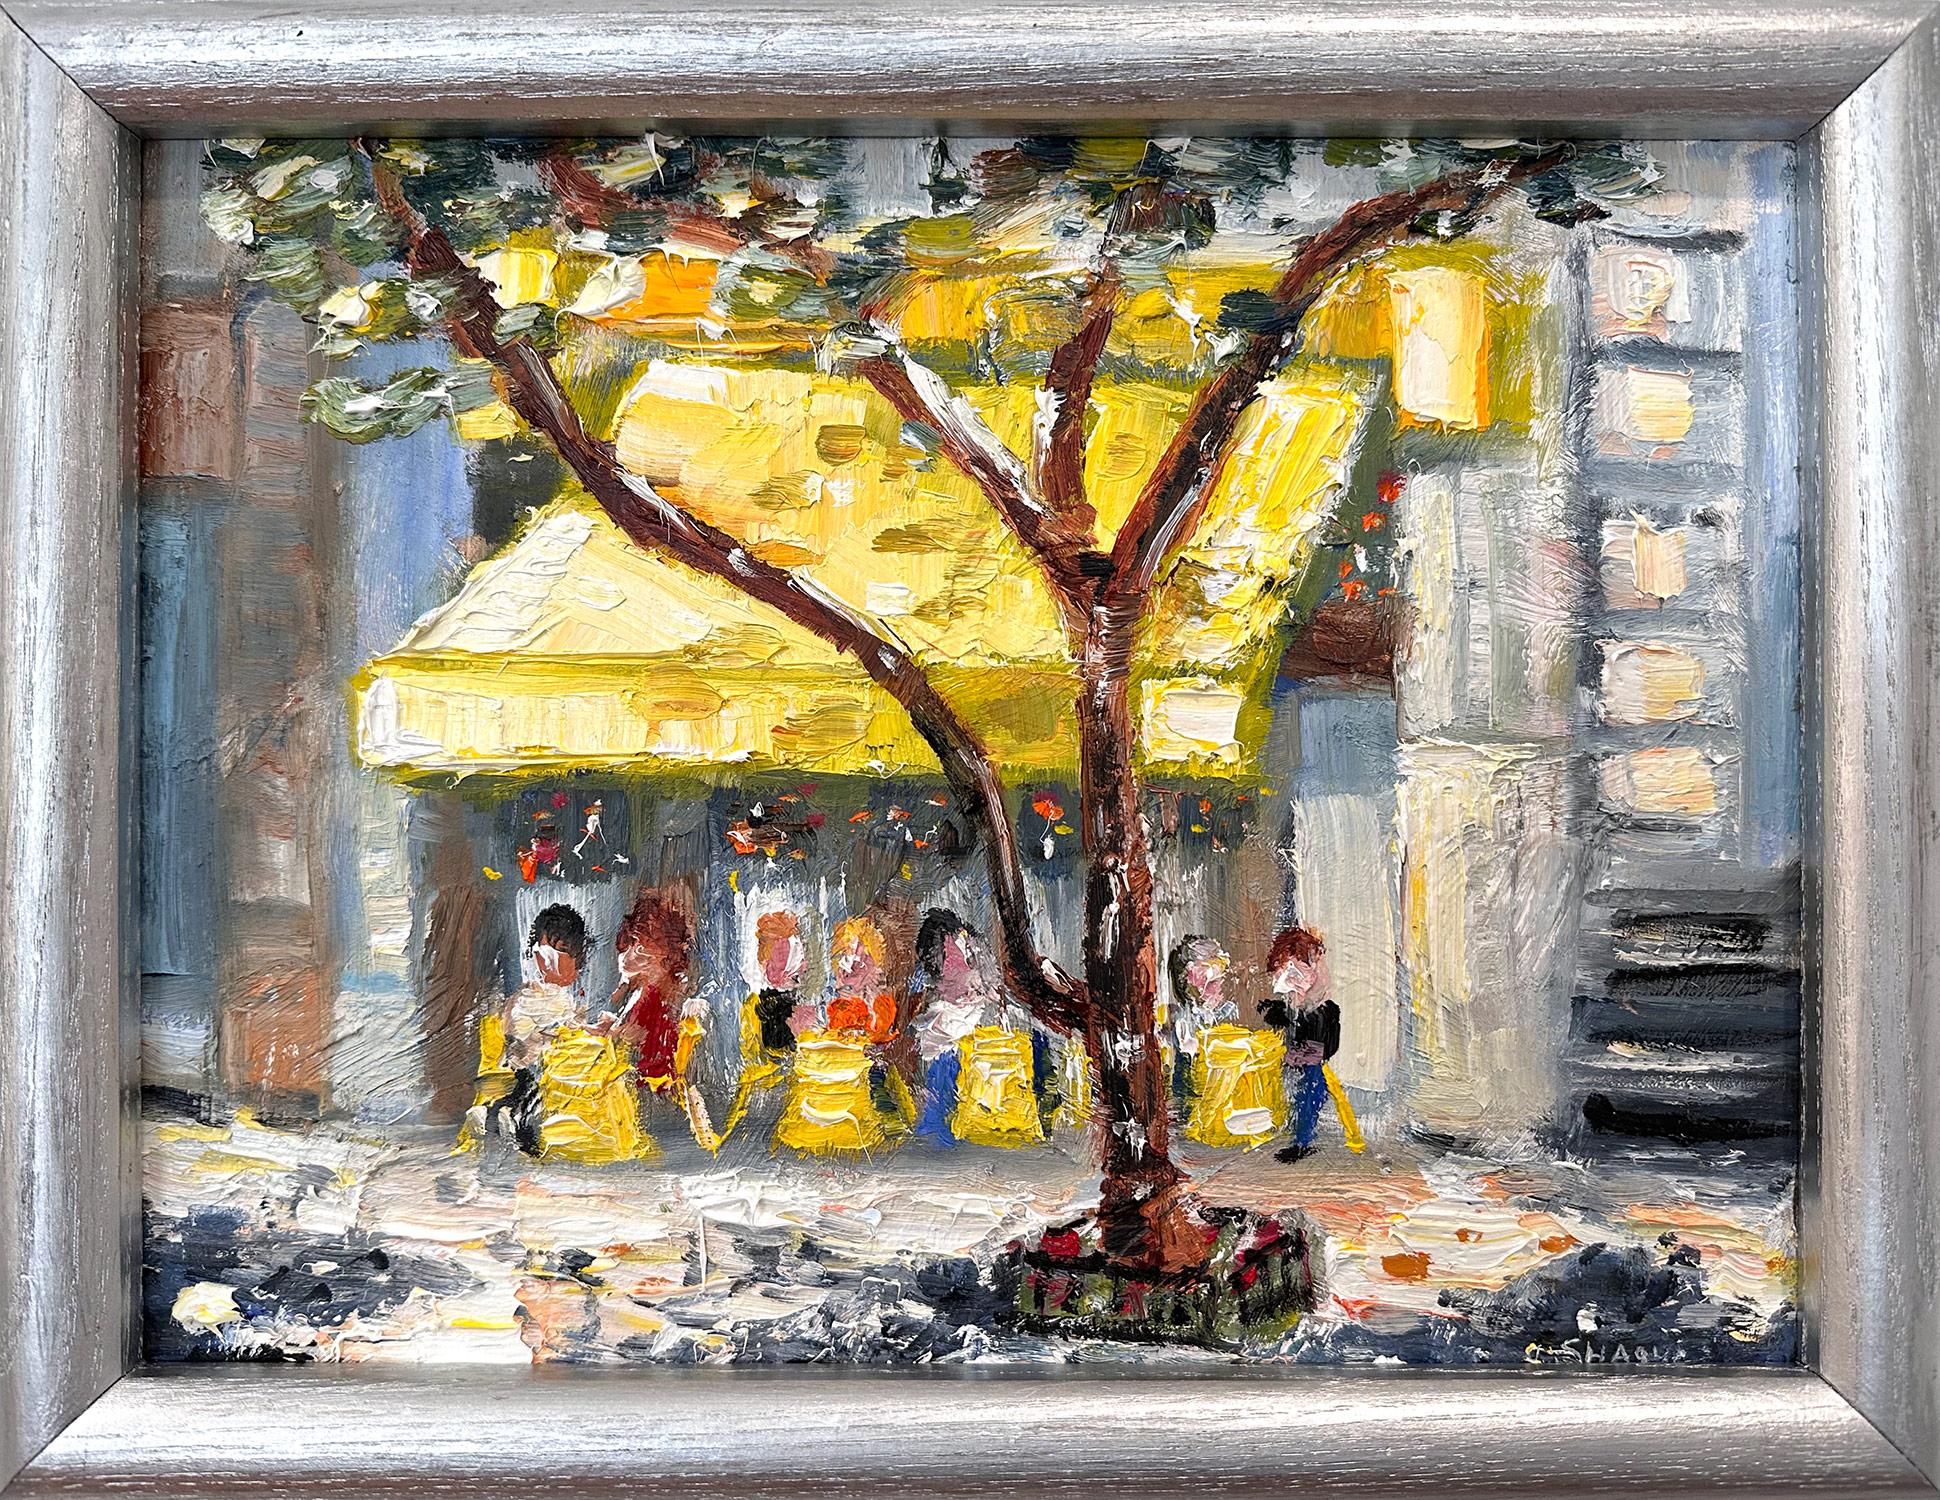 Cindy Shaoul Landscape Painting - "Brunch at Cipriani" Plein Air Restaurant Oil Painting in Soho New York City